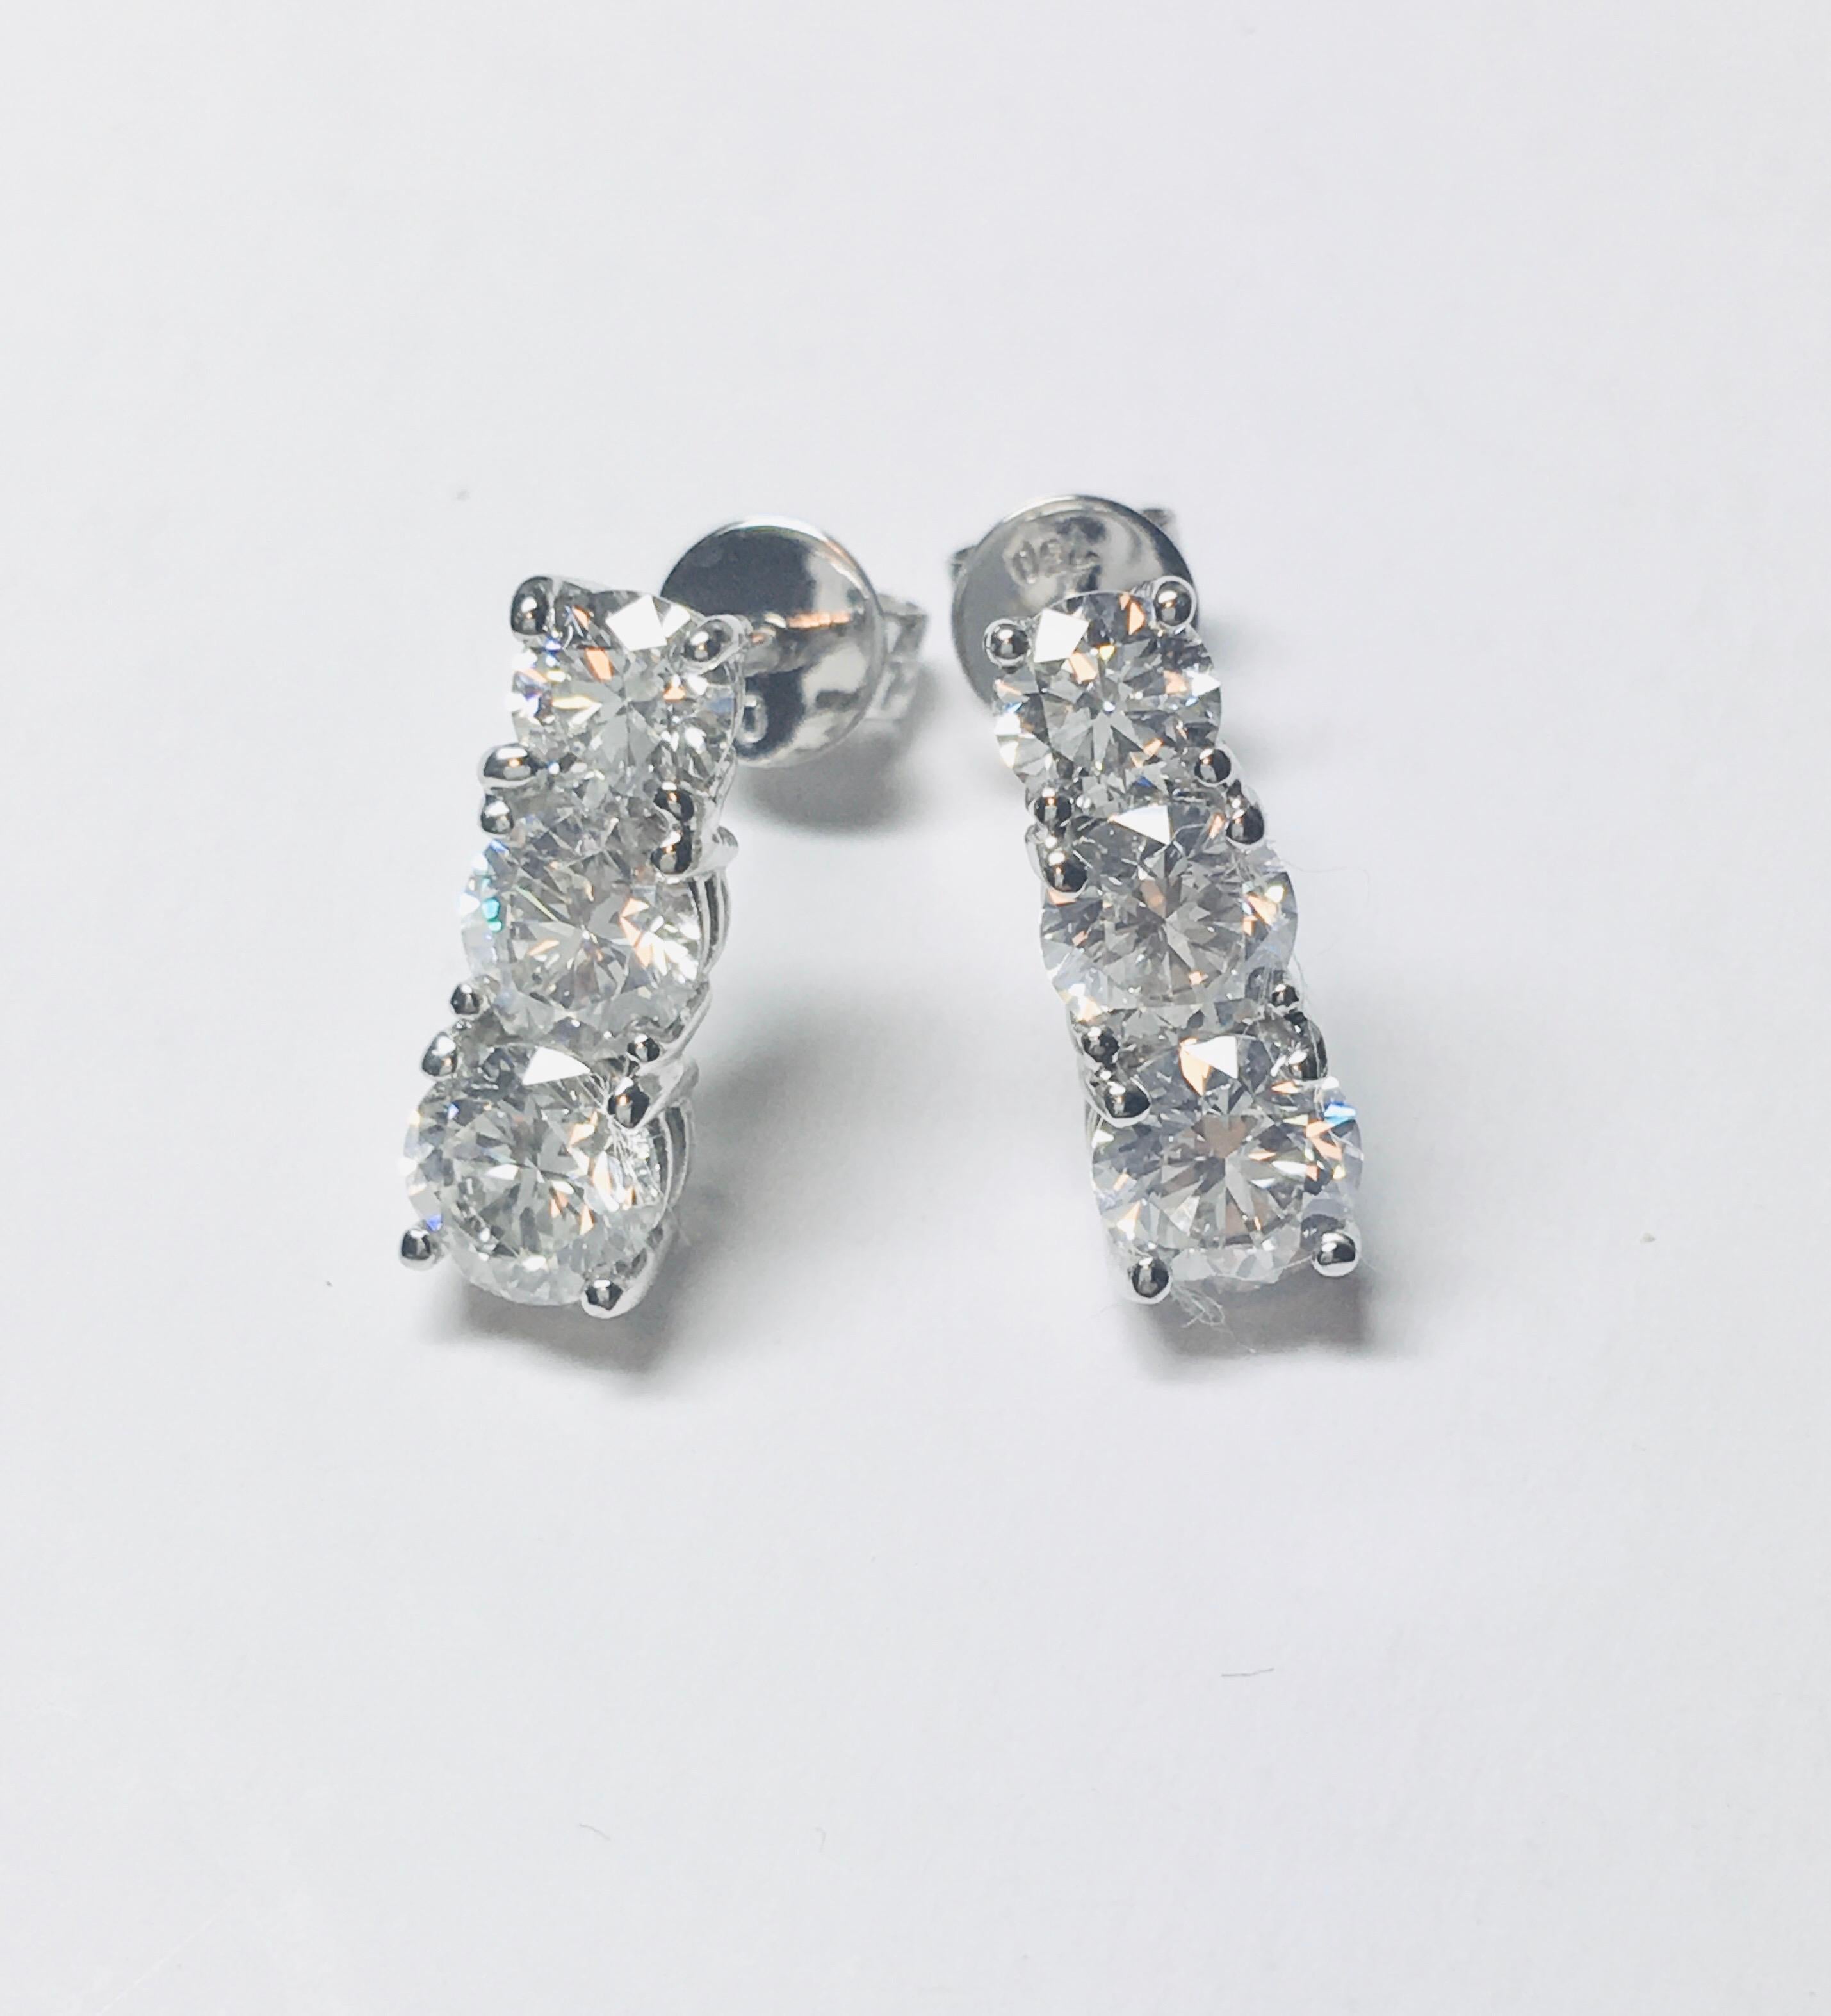 Classy understated Pair of graduated round brilliant cut three-stone diamond drop earrings, featuring a total of 0.75 carat diamond colour G/H clarity SI, each stone is set in a classic 4 claw mount with post and butterfly fittings, all set in 18